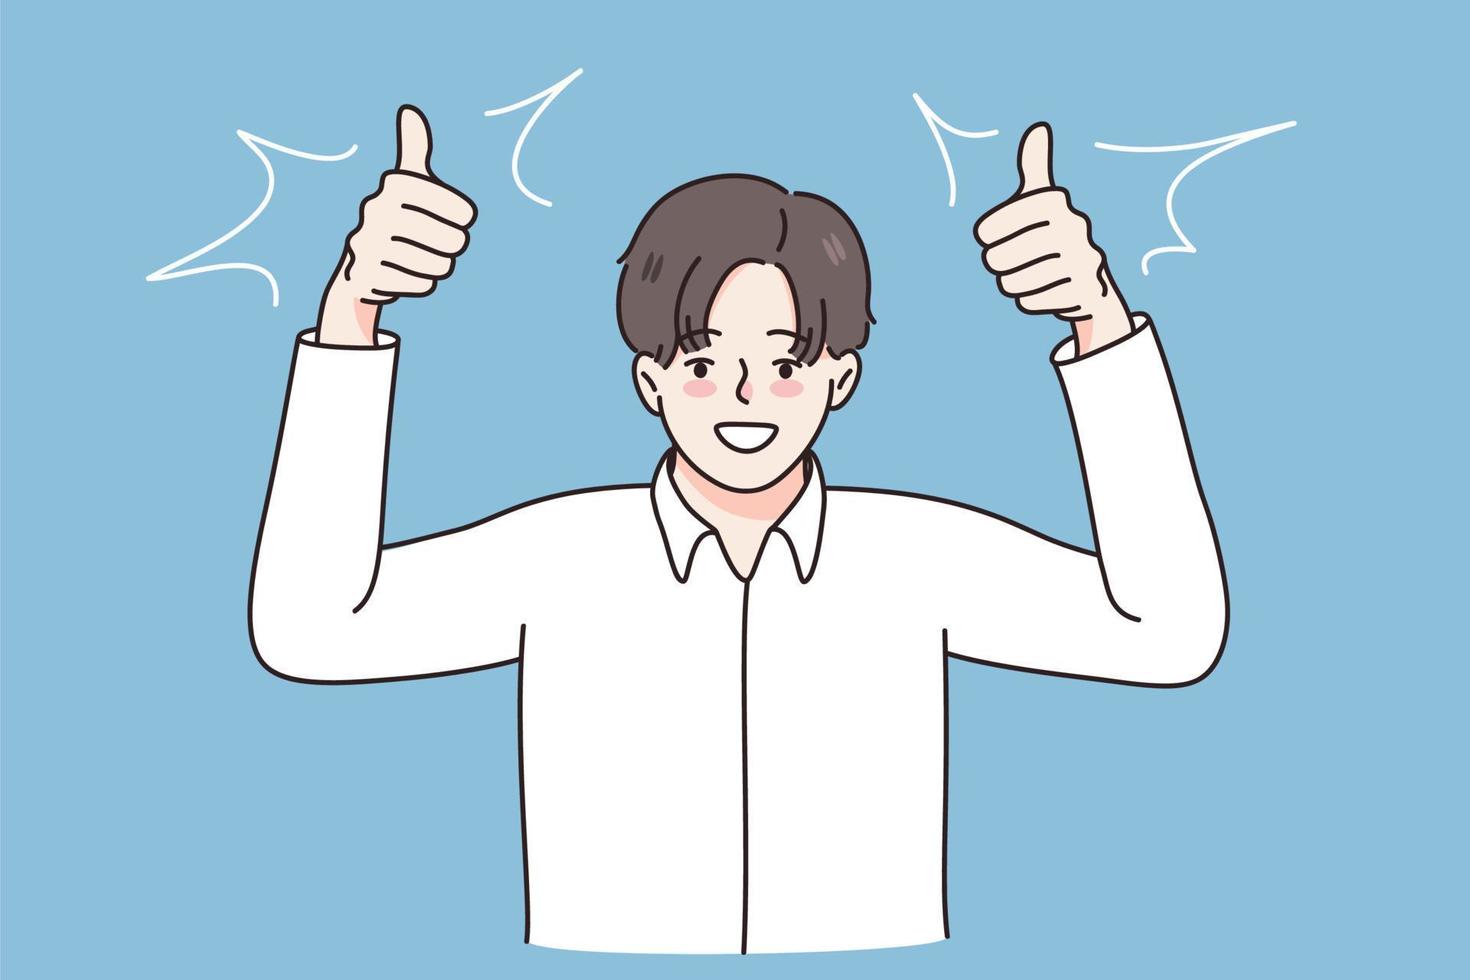 Success and thumb up sign concept. Young smiling businessman wearing white shirt standing and showing thumb up sign with hands fingers vector illustration